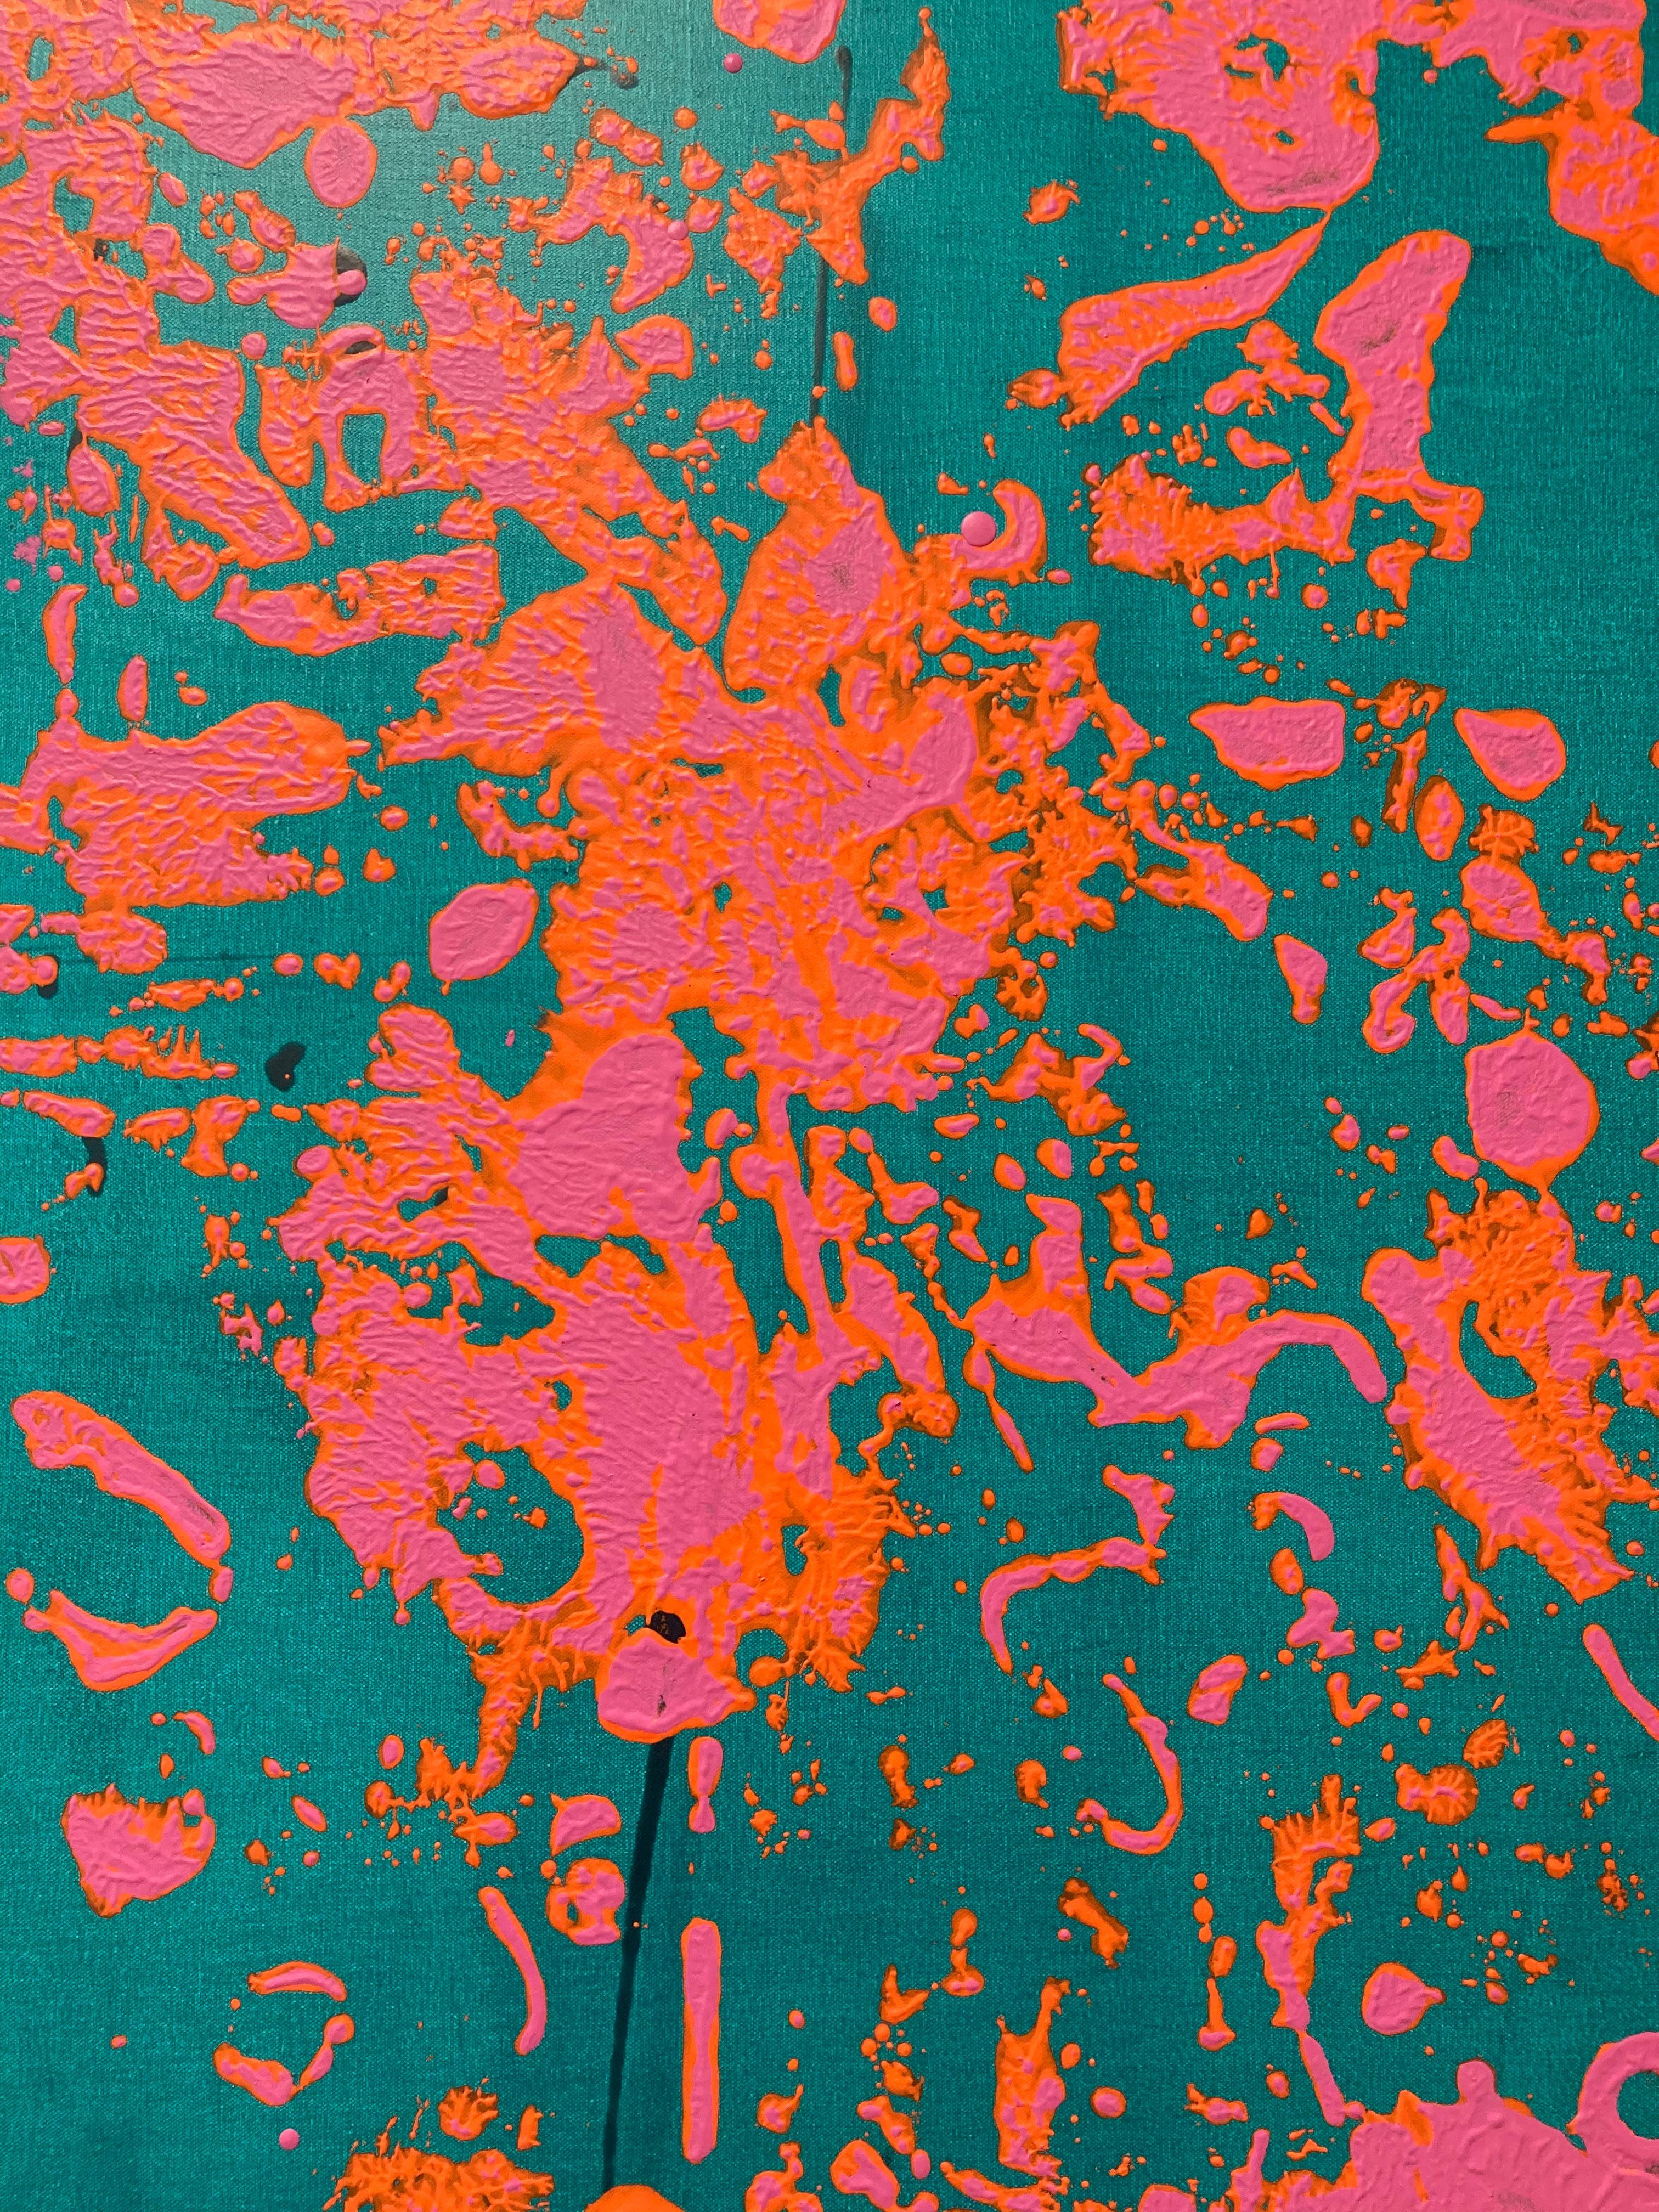 P18-0440, Vertical Abstract Painting, Teal Blue Green, Bright Pink, Orange 5